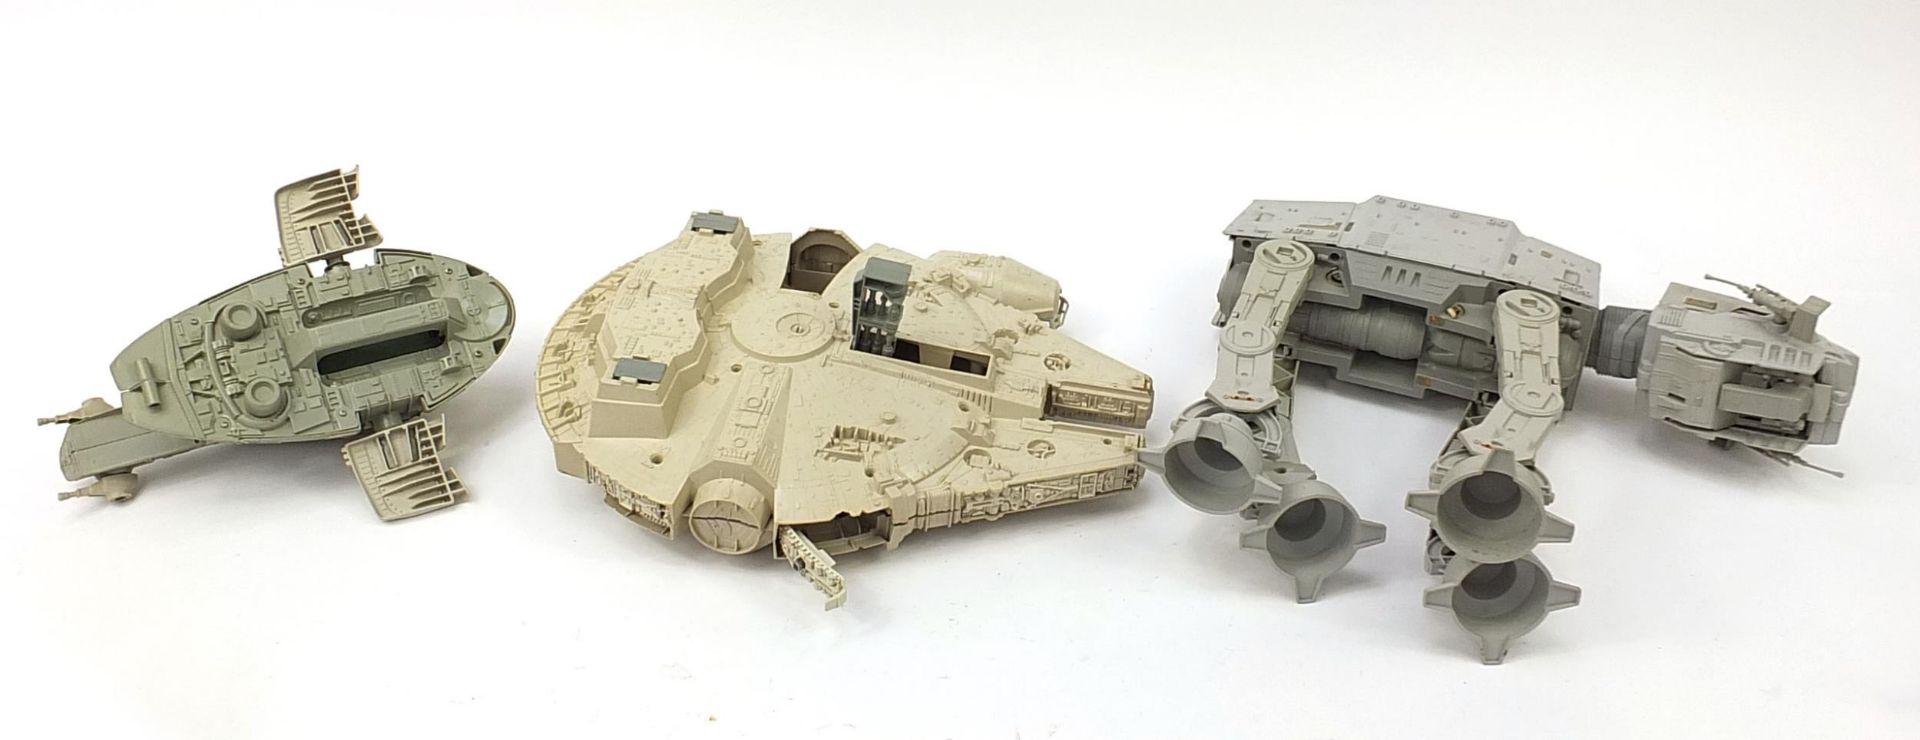 Three large vintage Star Wars toys including Millennium Falcon, the largest 48cm high - Image 3 of 3